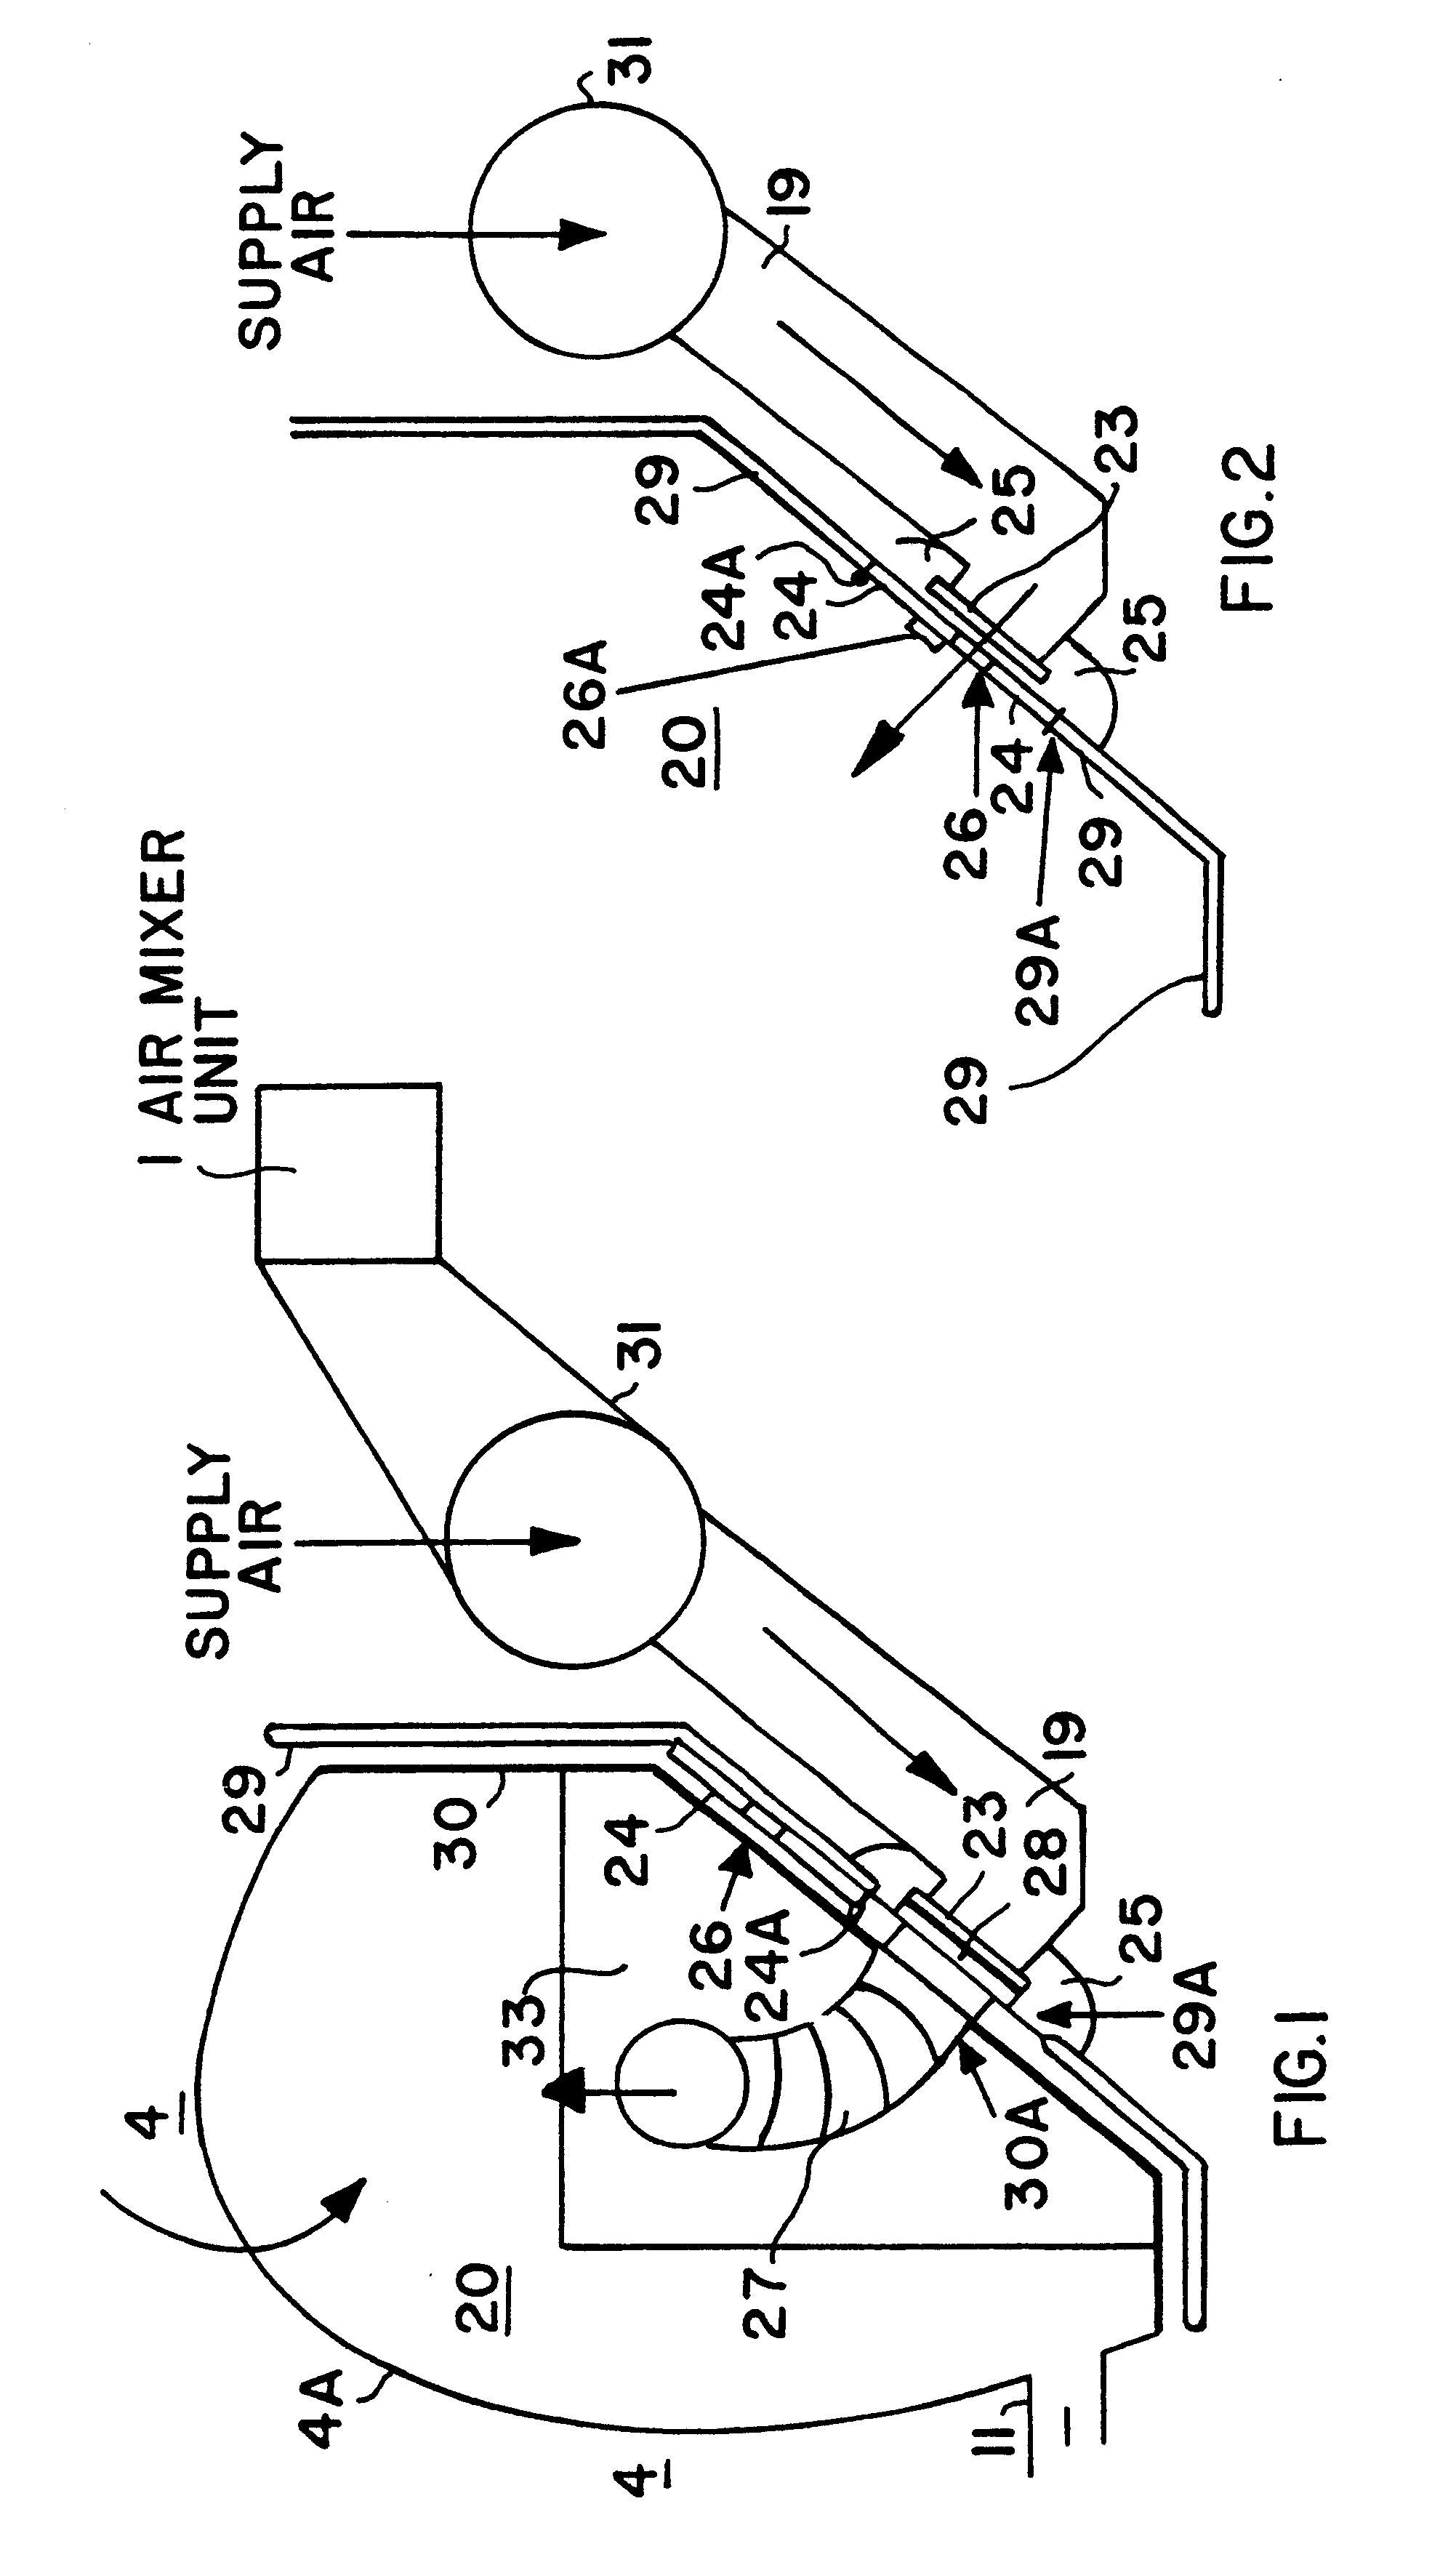 Reconfigurable air supply arrangement of an air-conditioning system for below-deck areas of a passenger aircraft